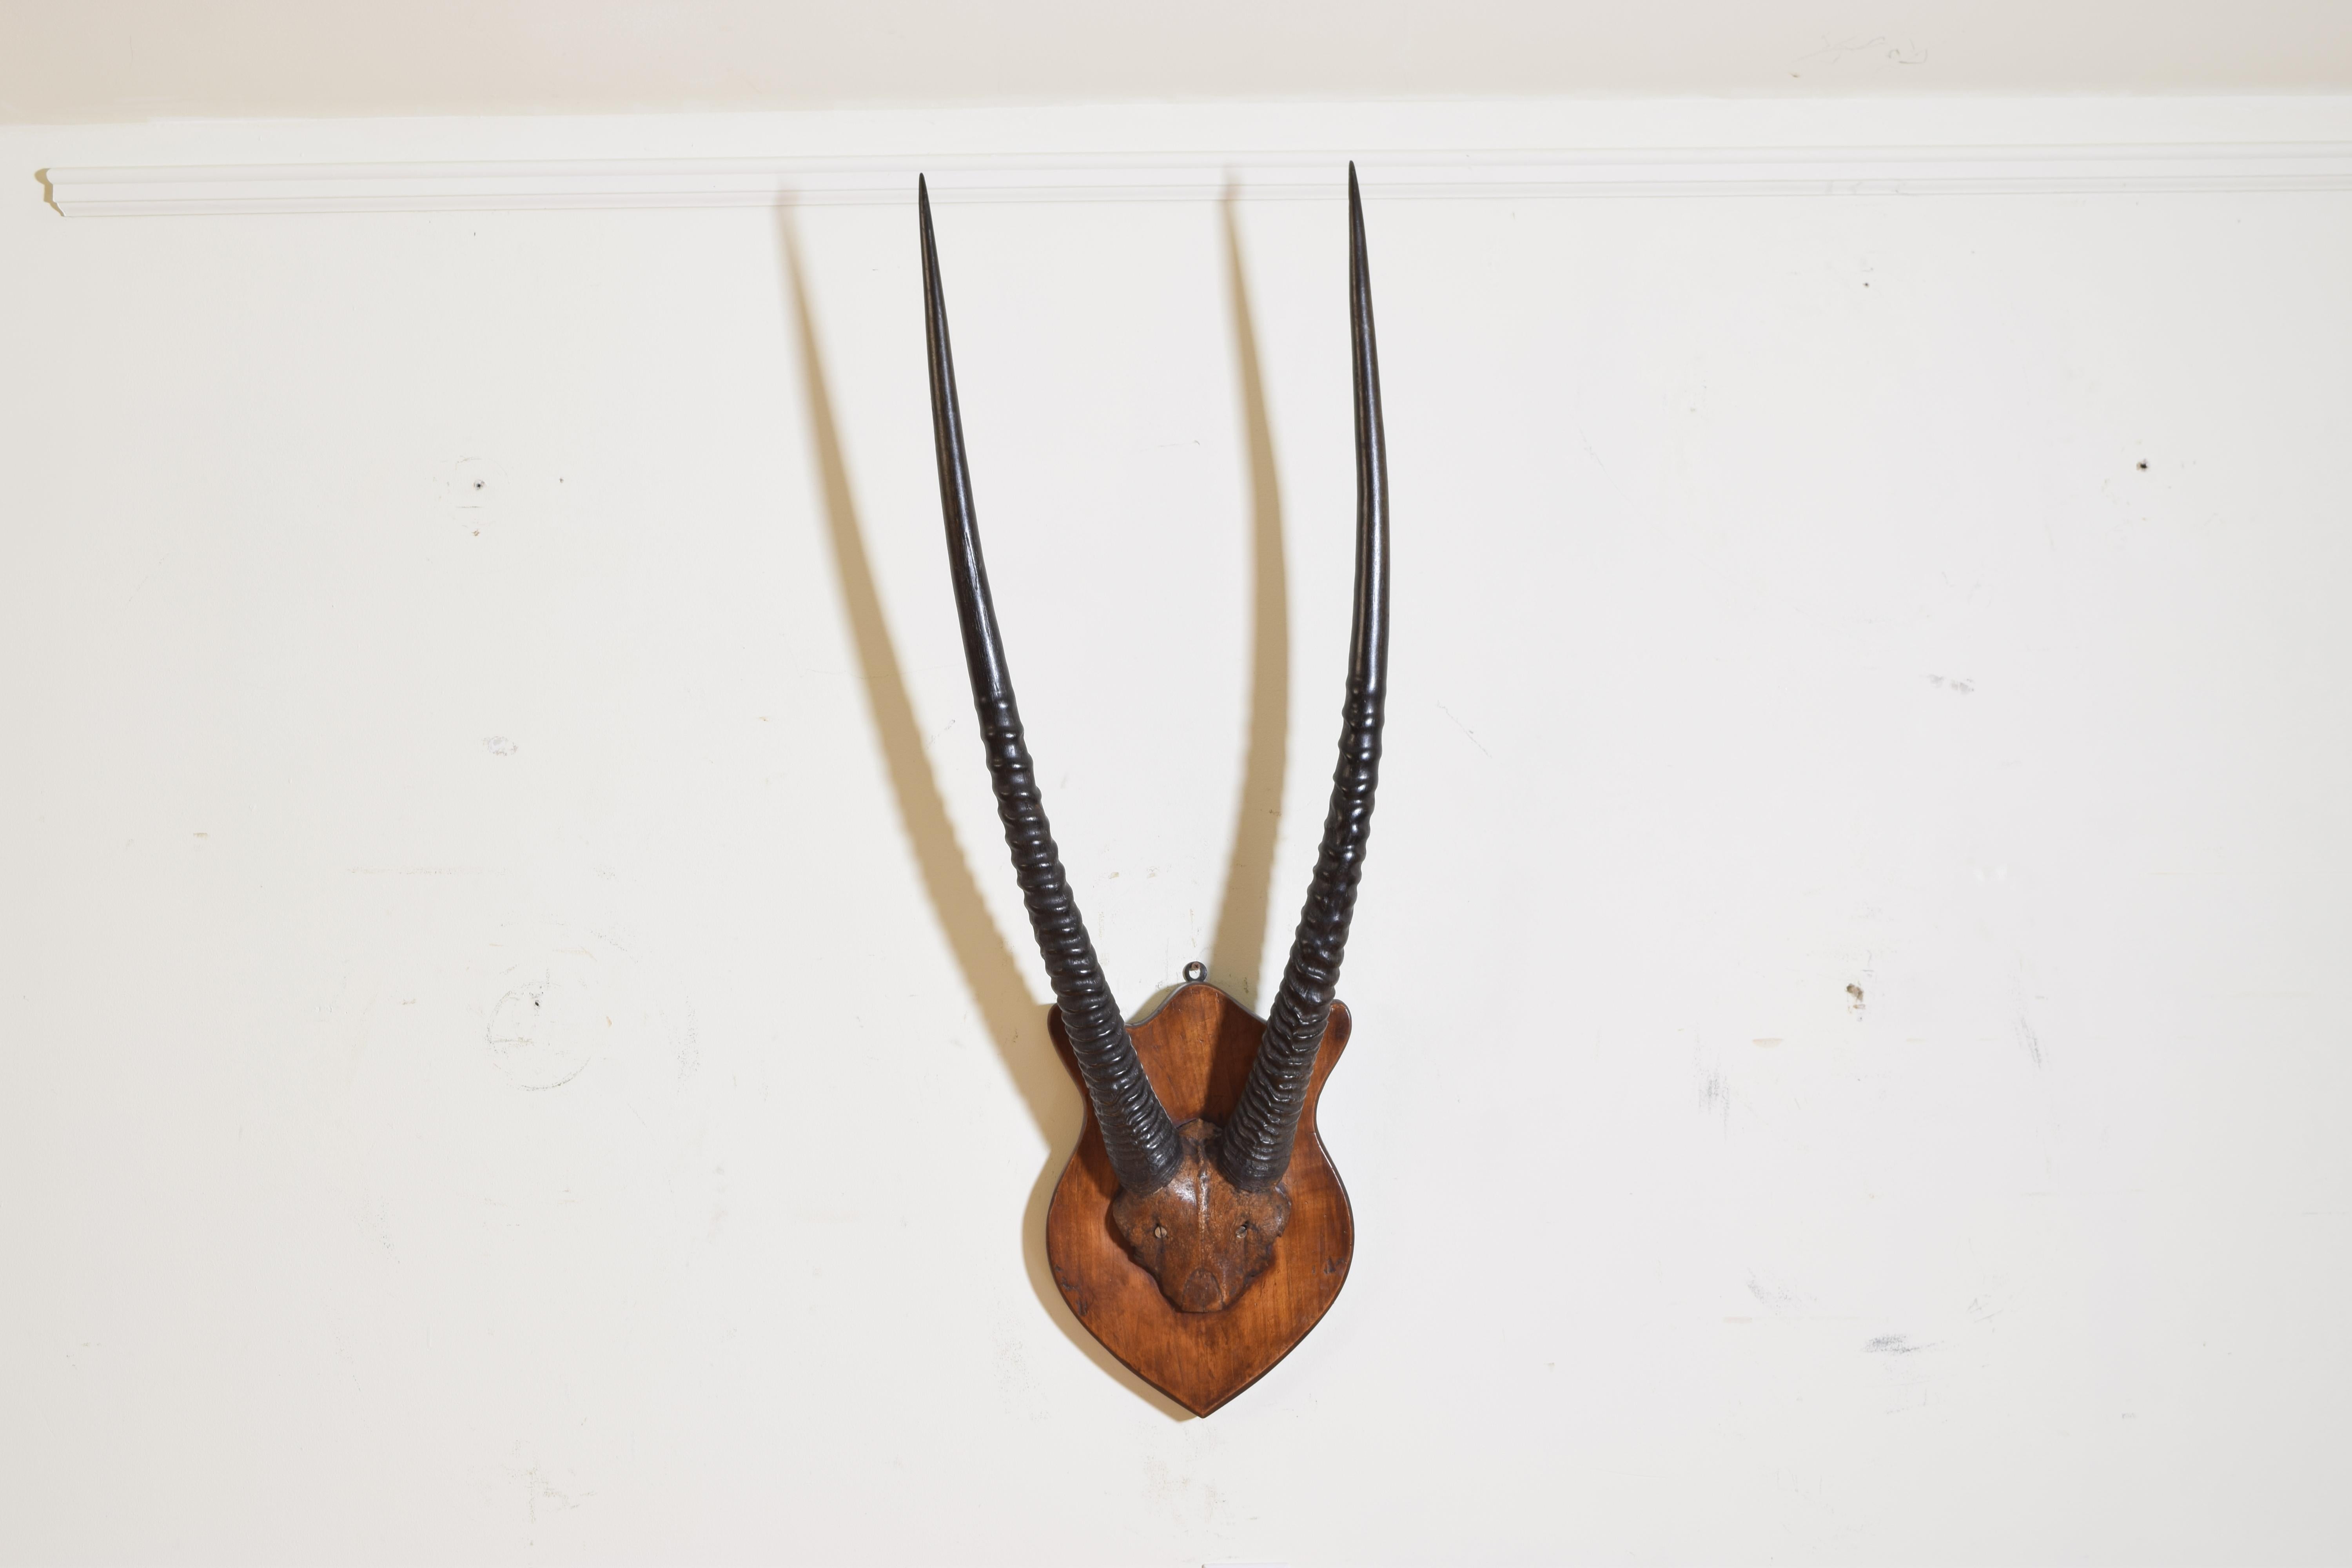 The horns and partial skull mounted on a shield form walnut backplate, the gemsbok, gemsbuck or South African Oryx (Oryx gazella) is a large antelope in the genus Oryx. It is native to the arid regions of Southern Africa, such as the Kalahari